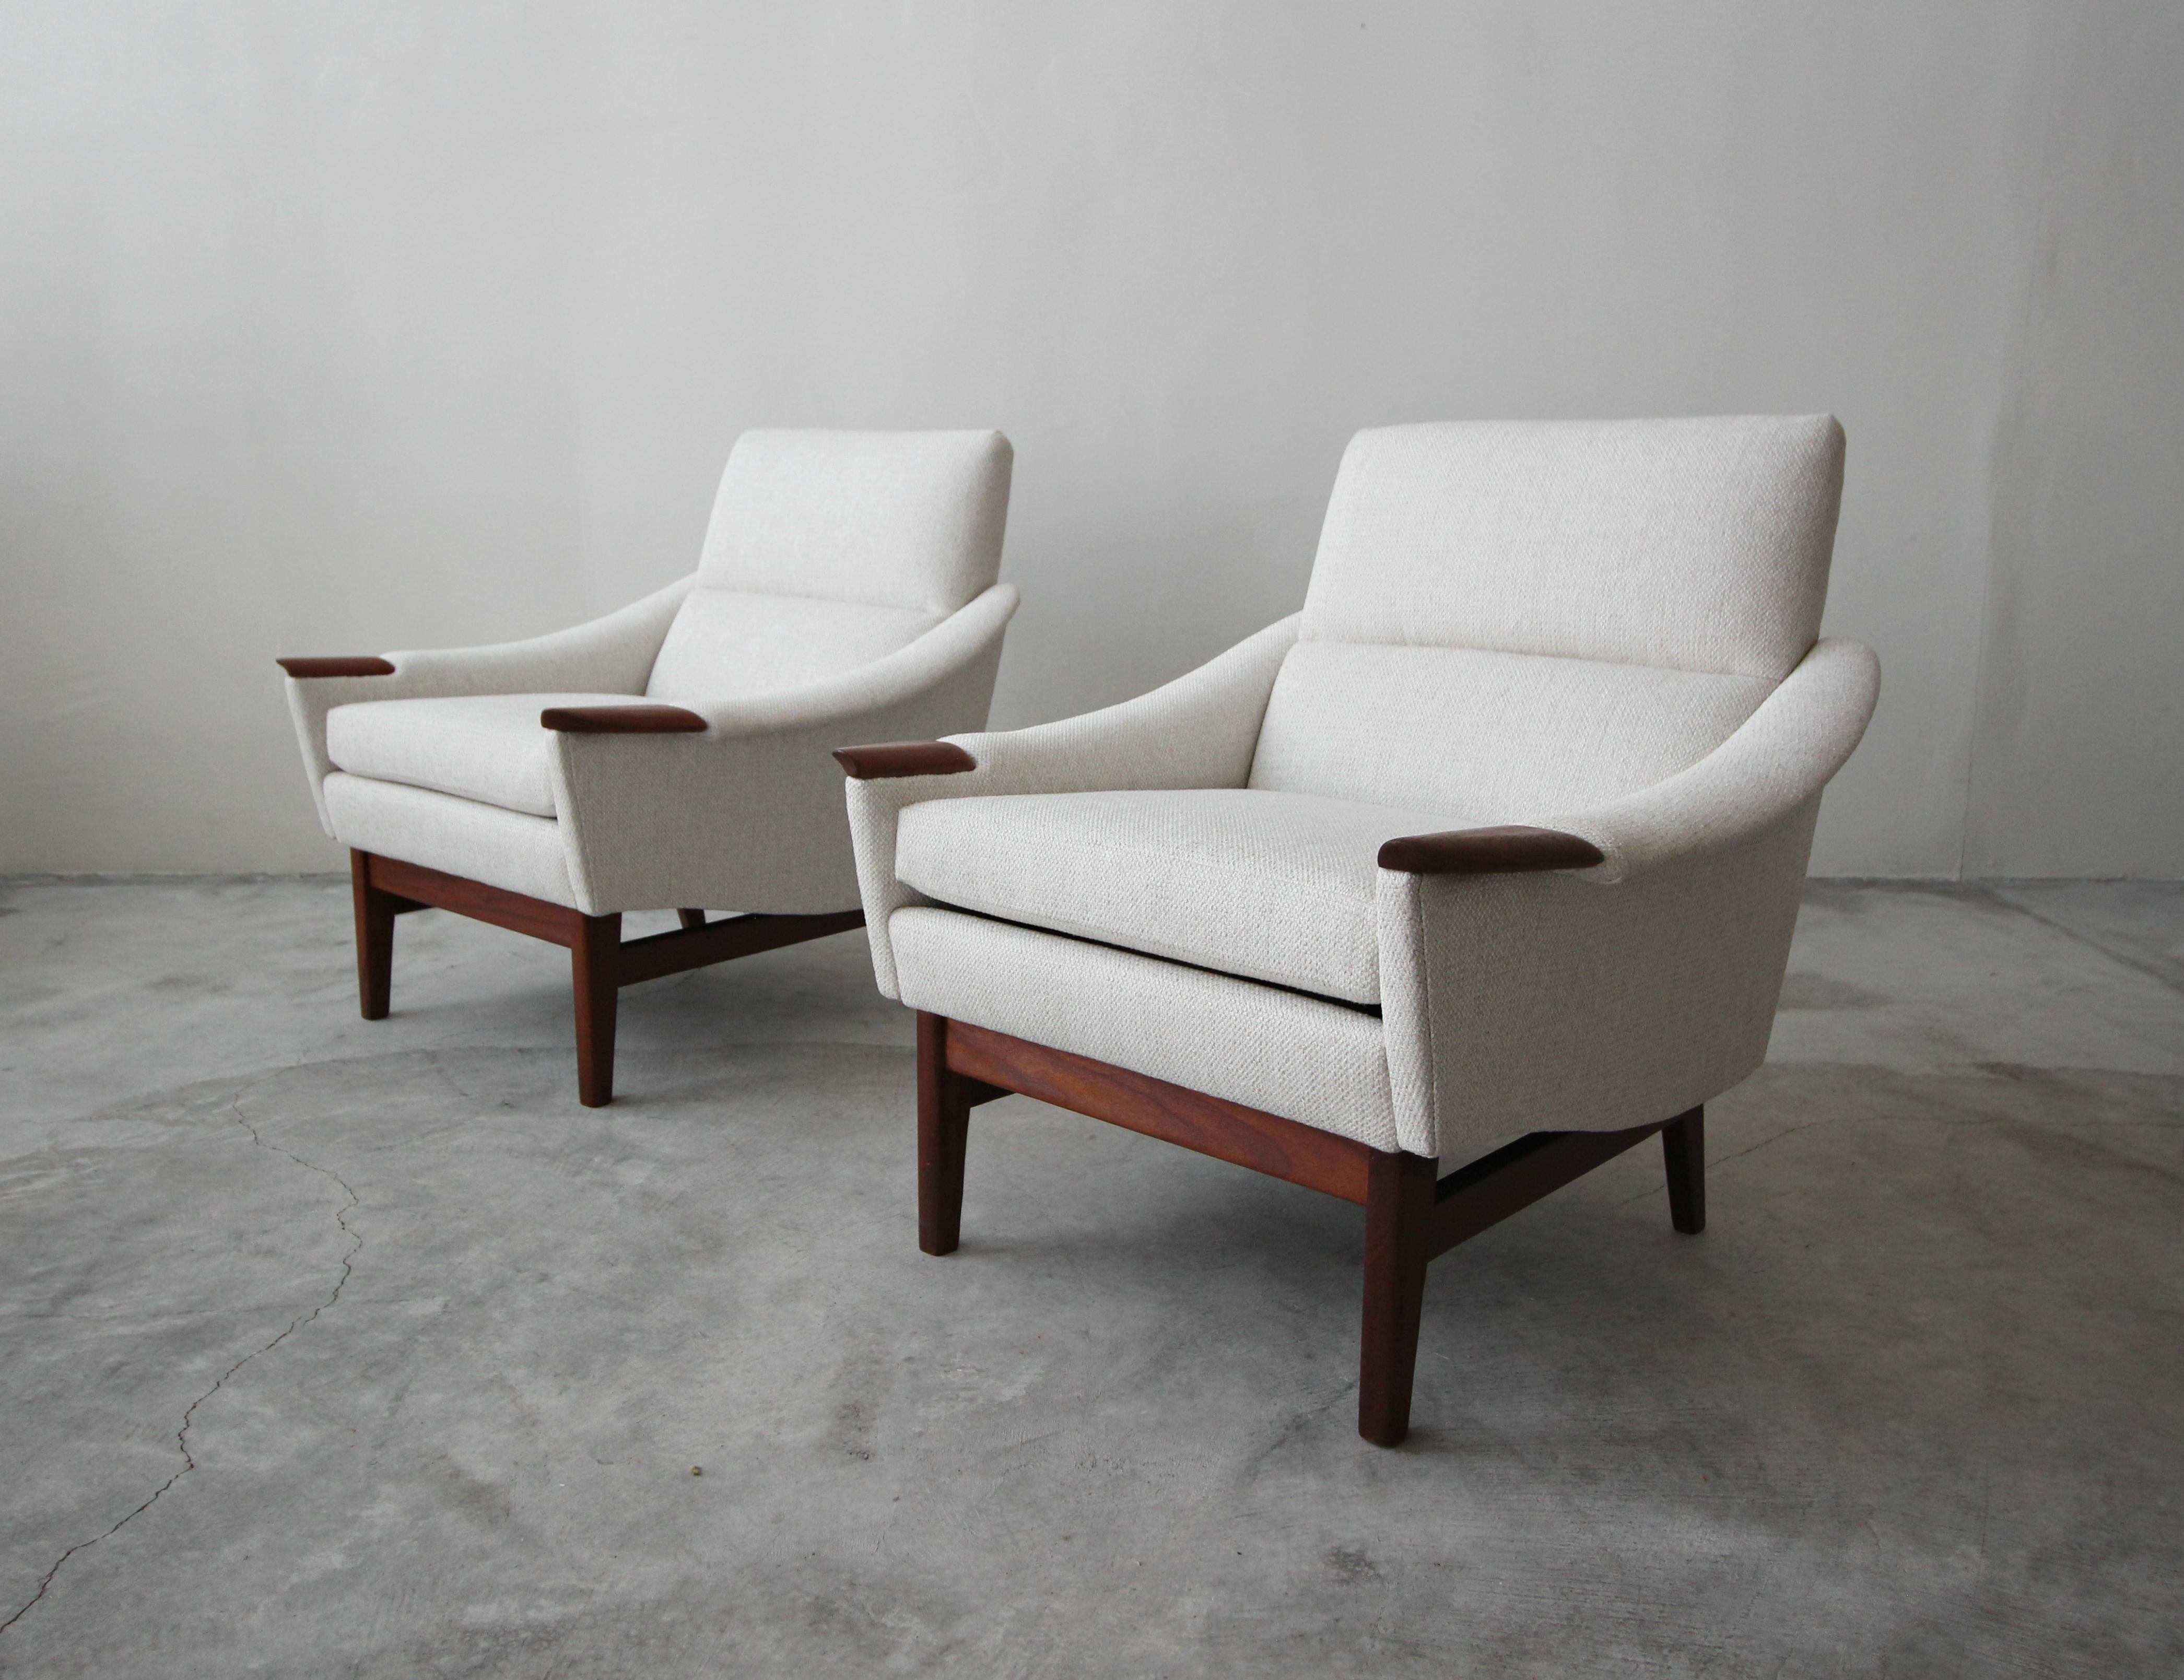 Beautiful pair of Danish Mid-Century Modern lounge chairs. They are the epitome of Classic Mid-Century Modern chairs, with their gorgeous lines and details like their walnut arms.

The chairs have been completely restored with all new foam and